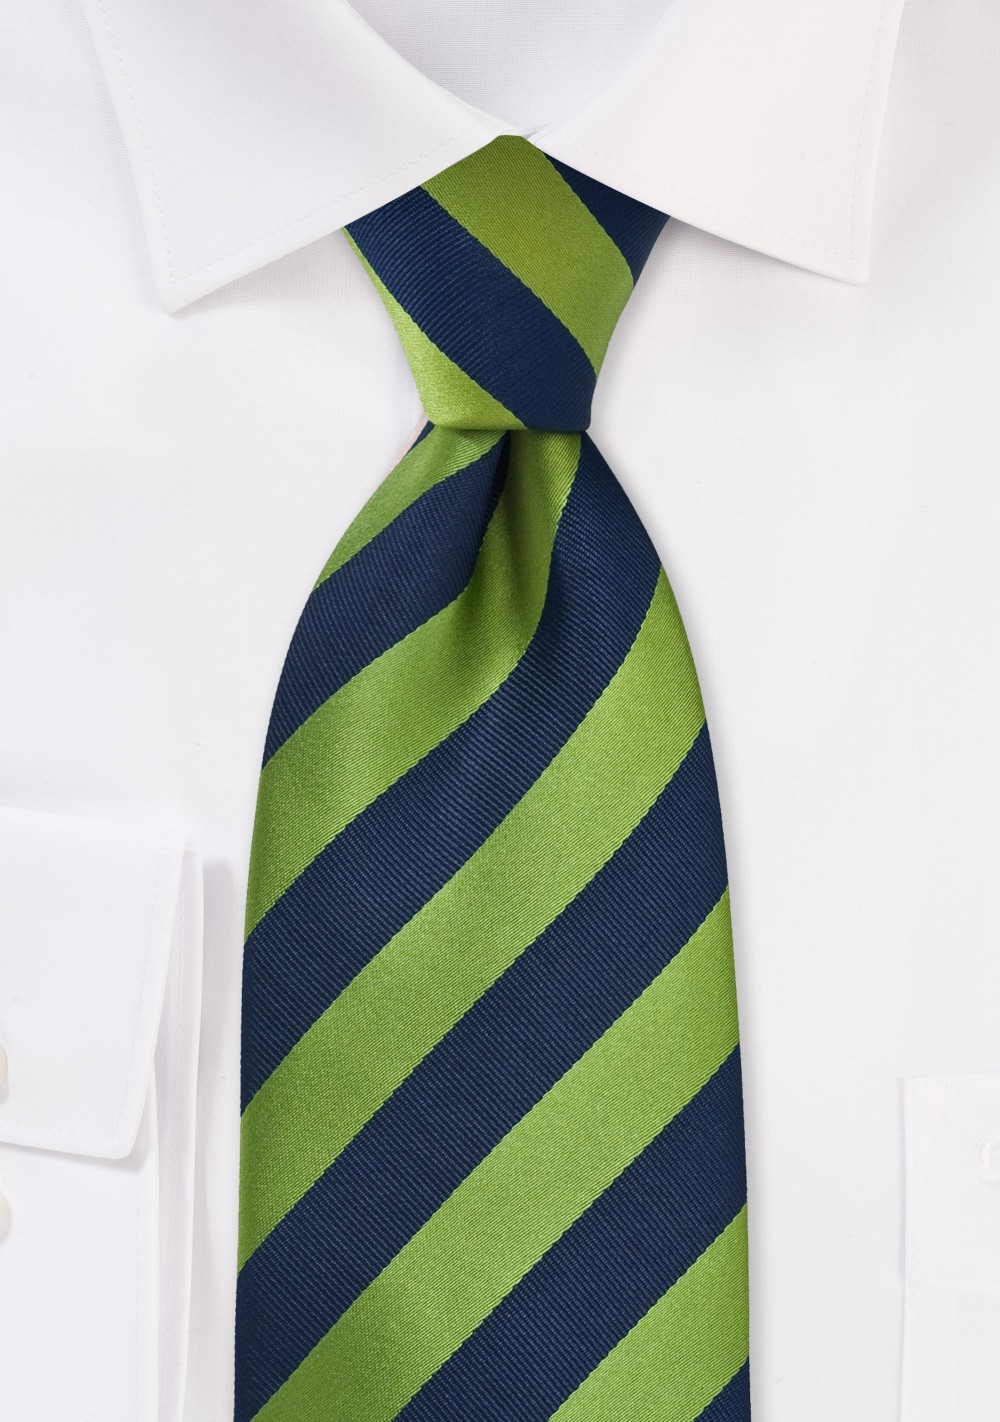 Navy and Fern Green Tie